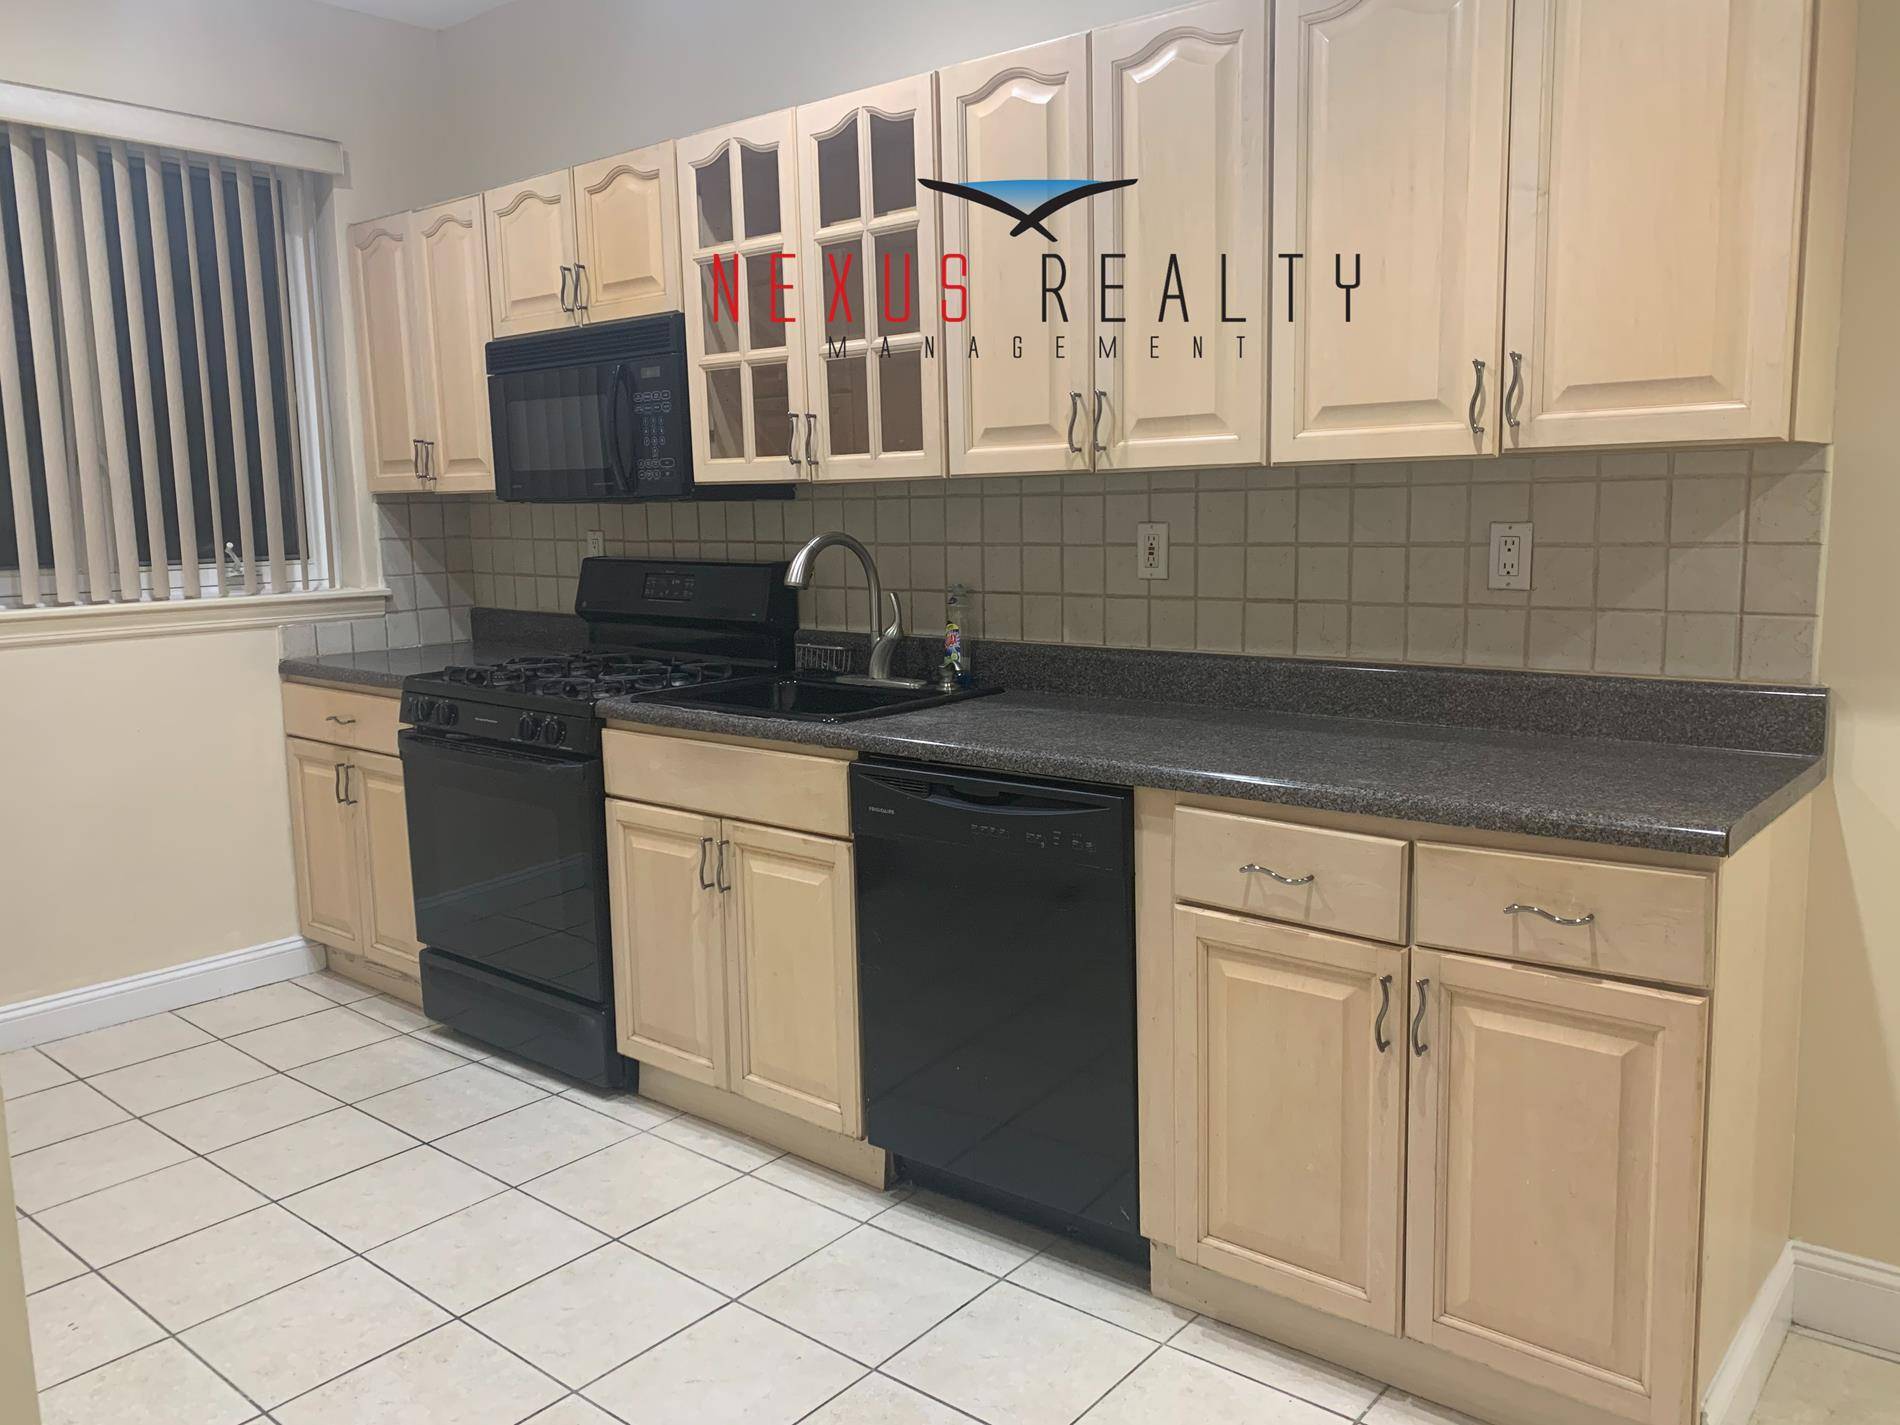 Beautiful 2 Bedroom apartment in Astoria 26001 King size bedroom and 1 queen size bedroom on the 1ST floor of a 2 family houseLarge kitchen area with dishwasher, microwave, and ...